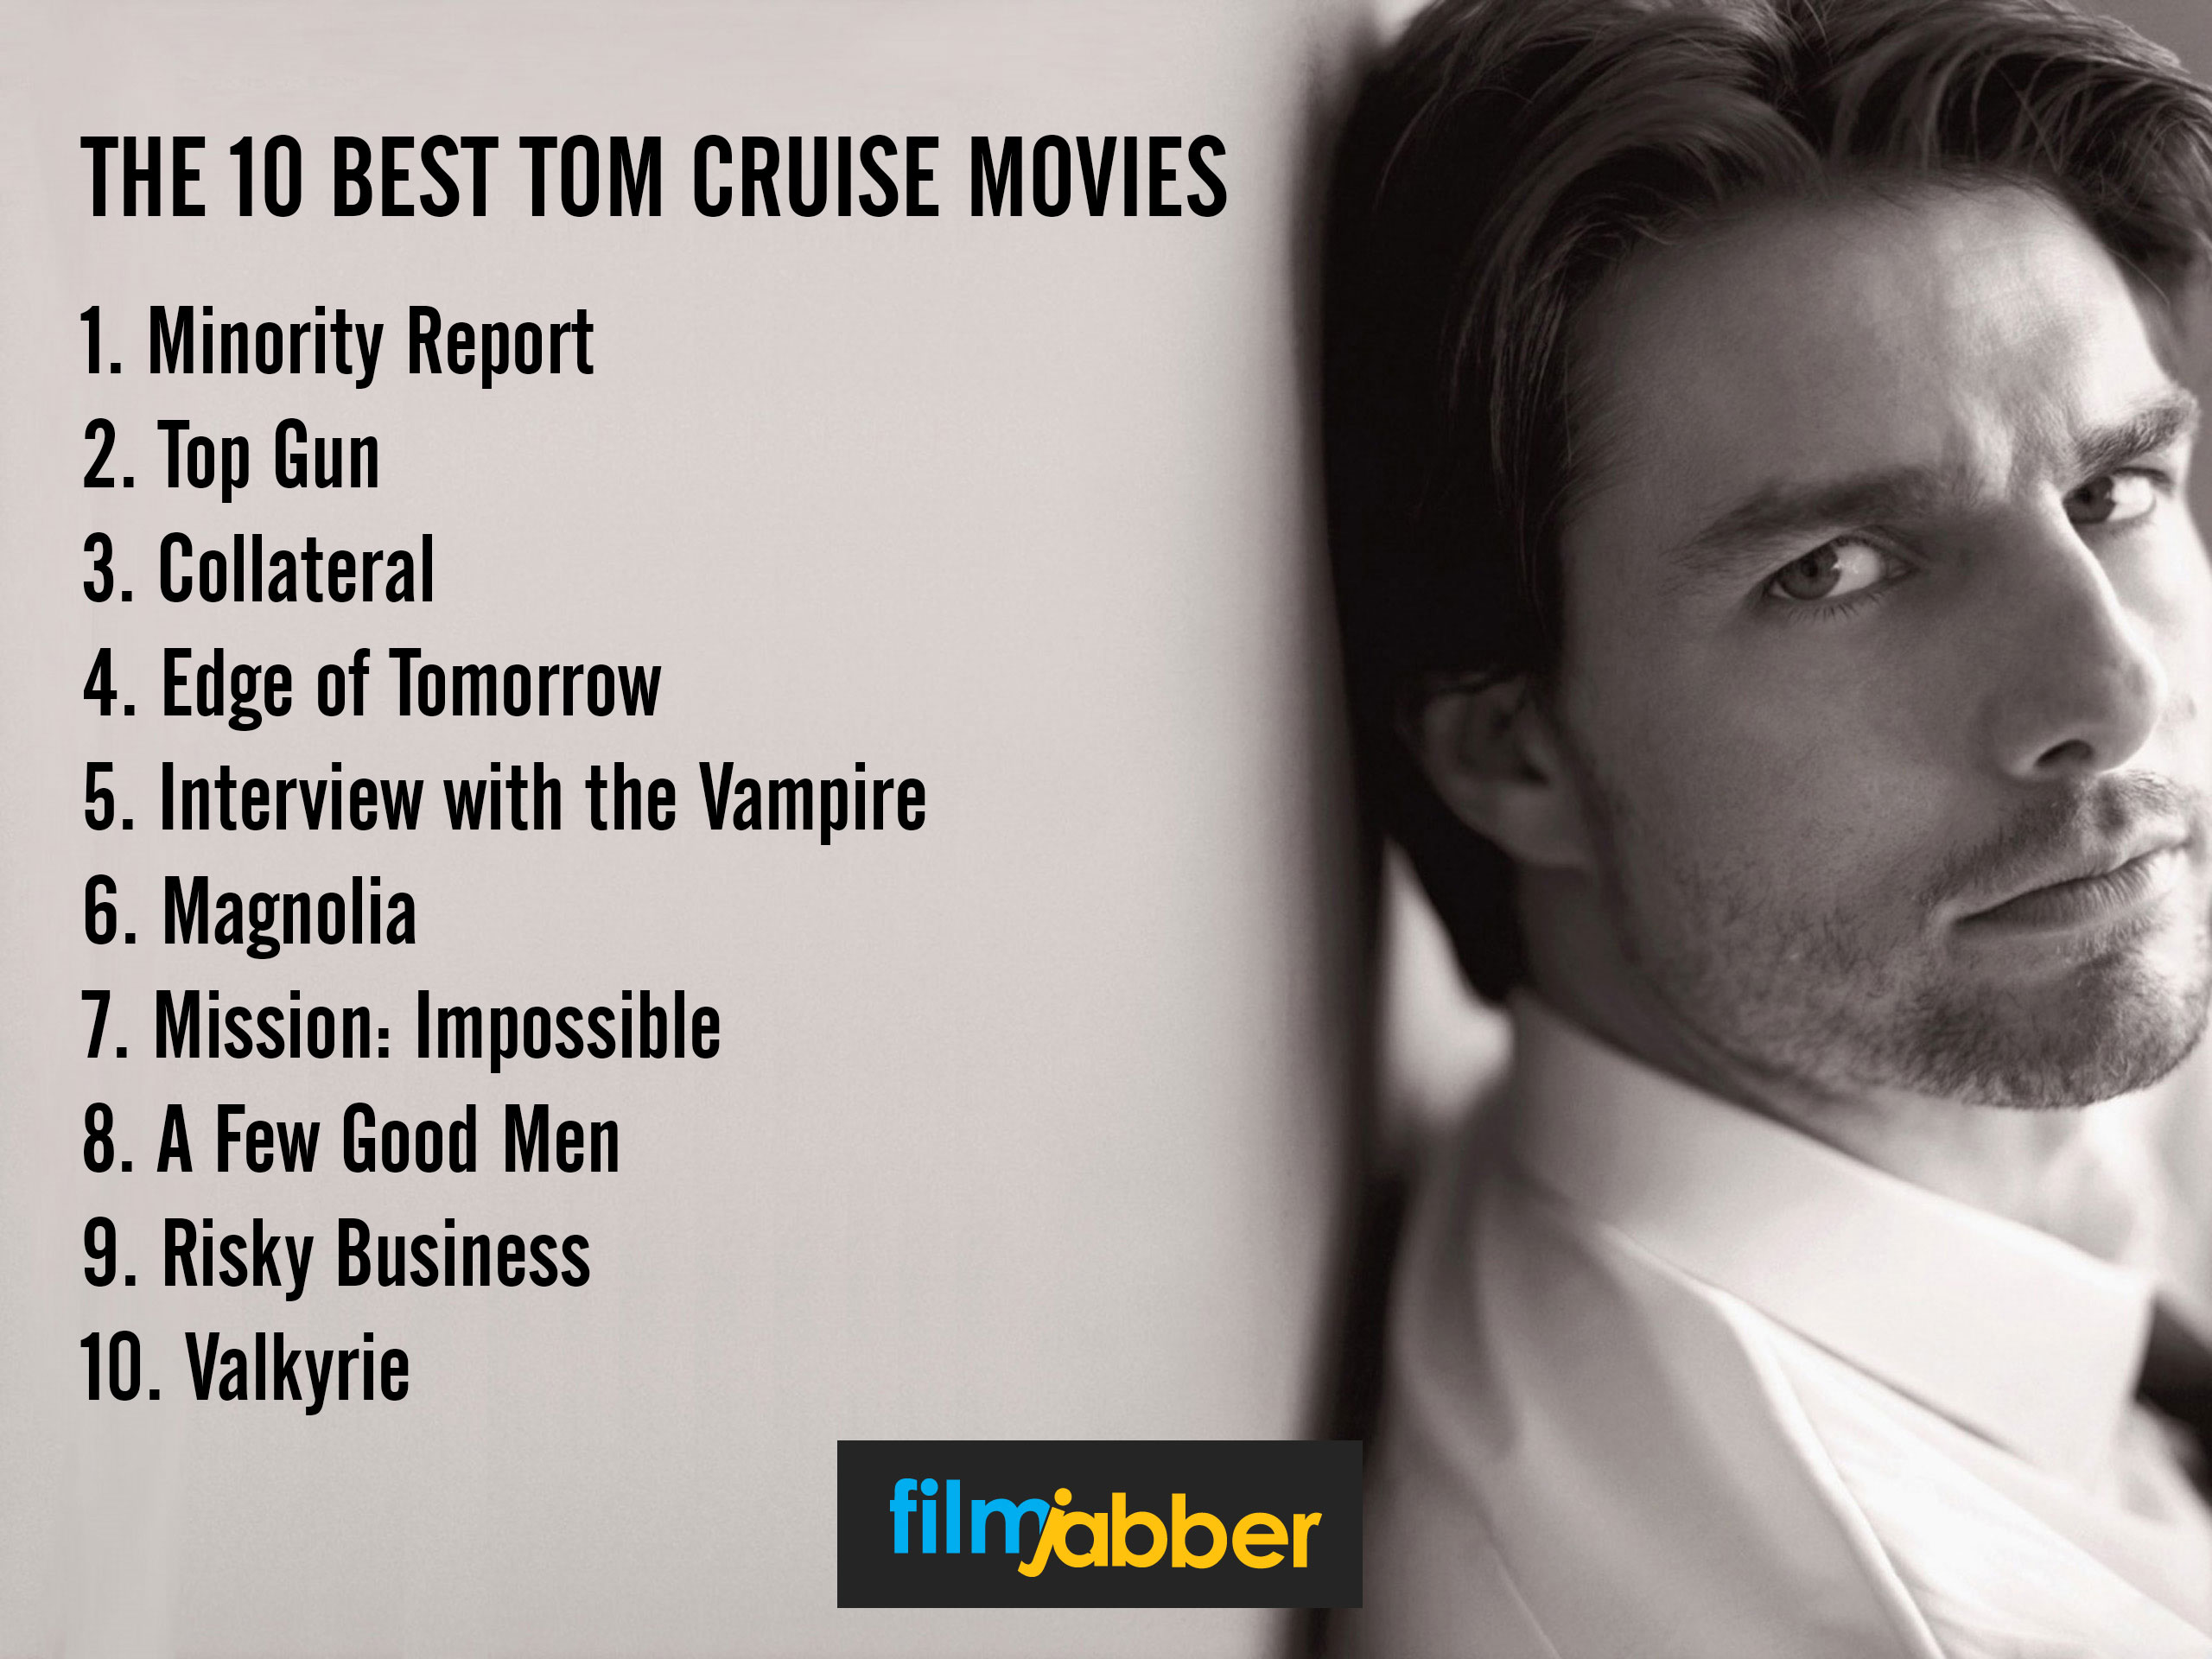 The 10 Best Tom Cruise Movies